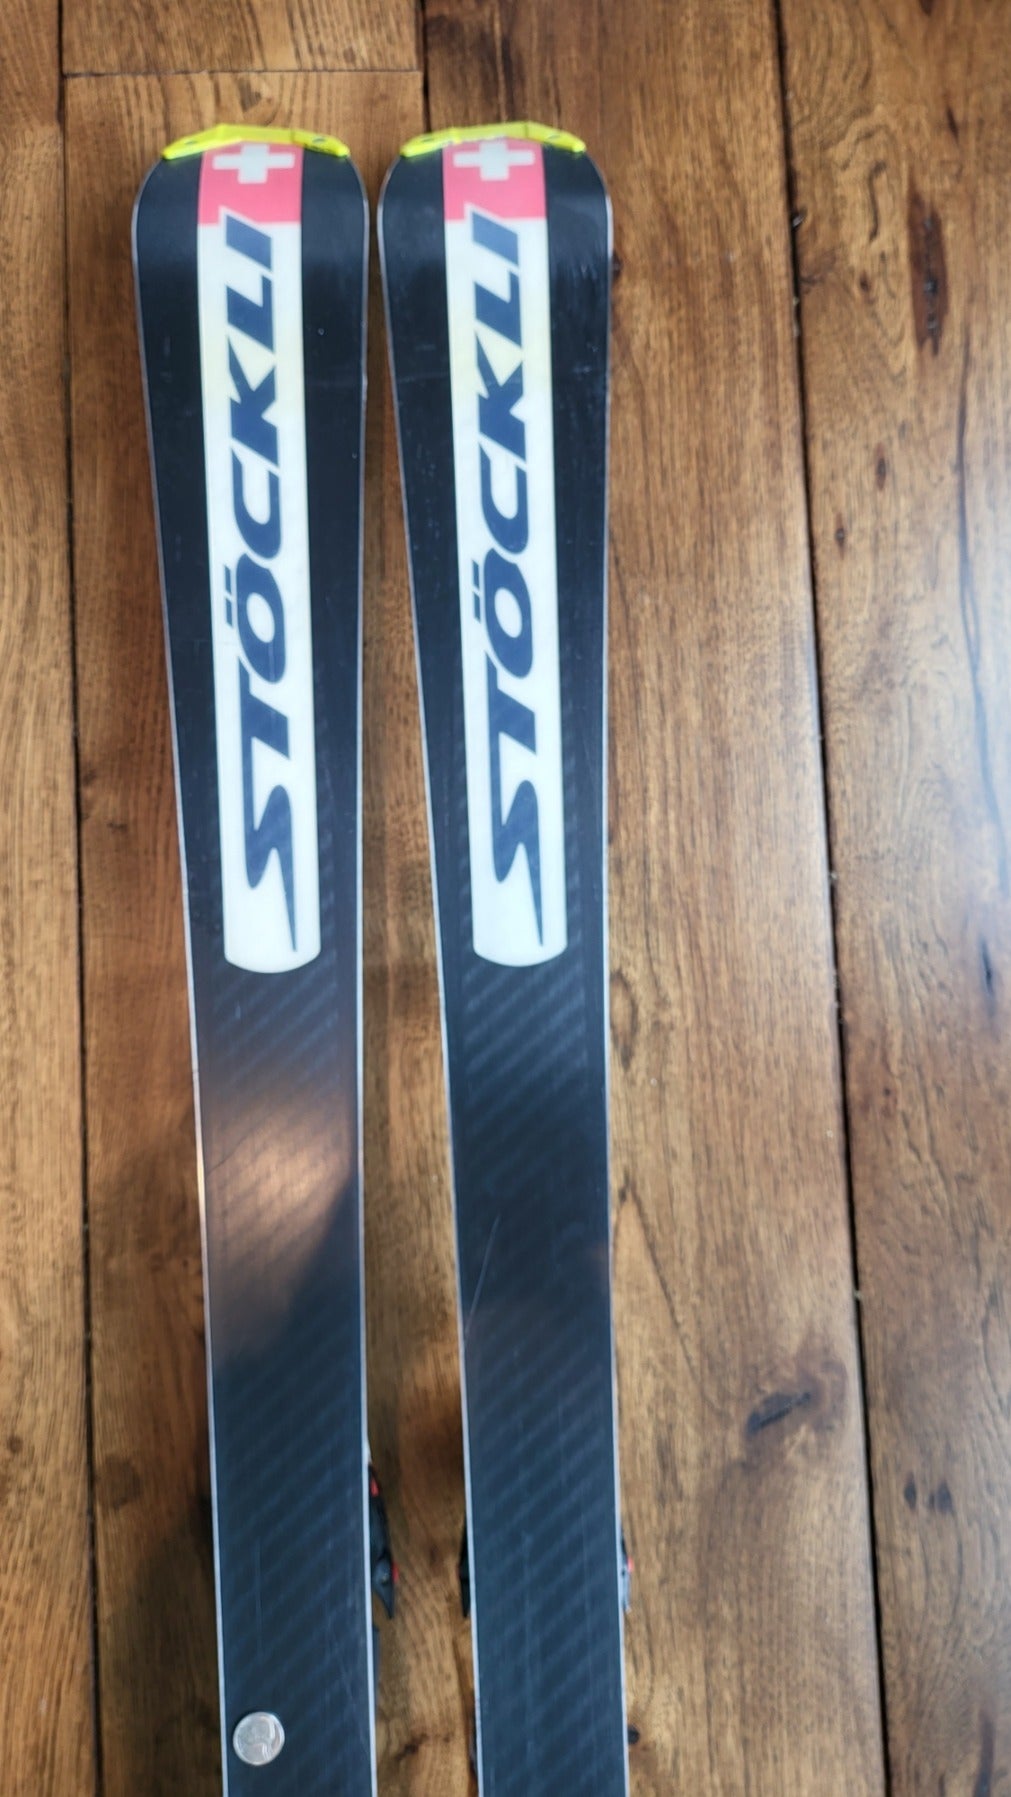 Stockli 155 cm Laser SL FIS Skis With Newer Marker Race Bindings 